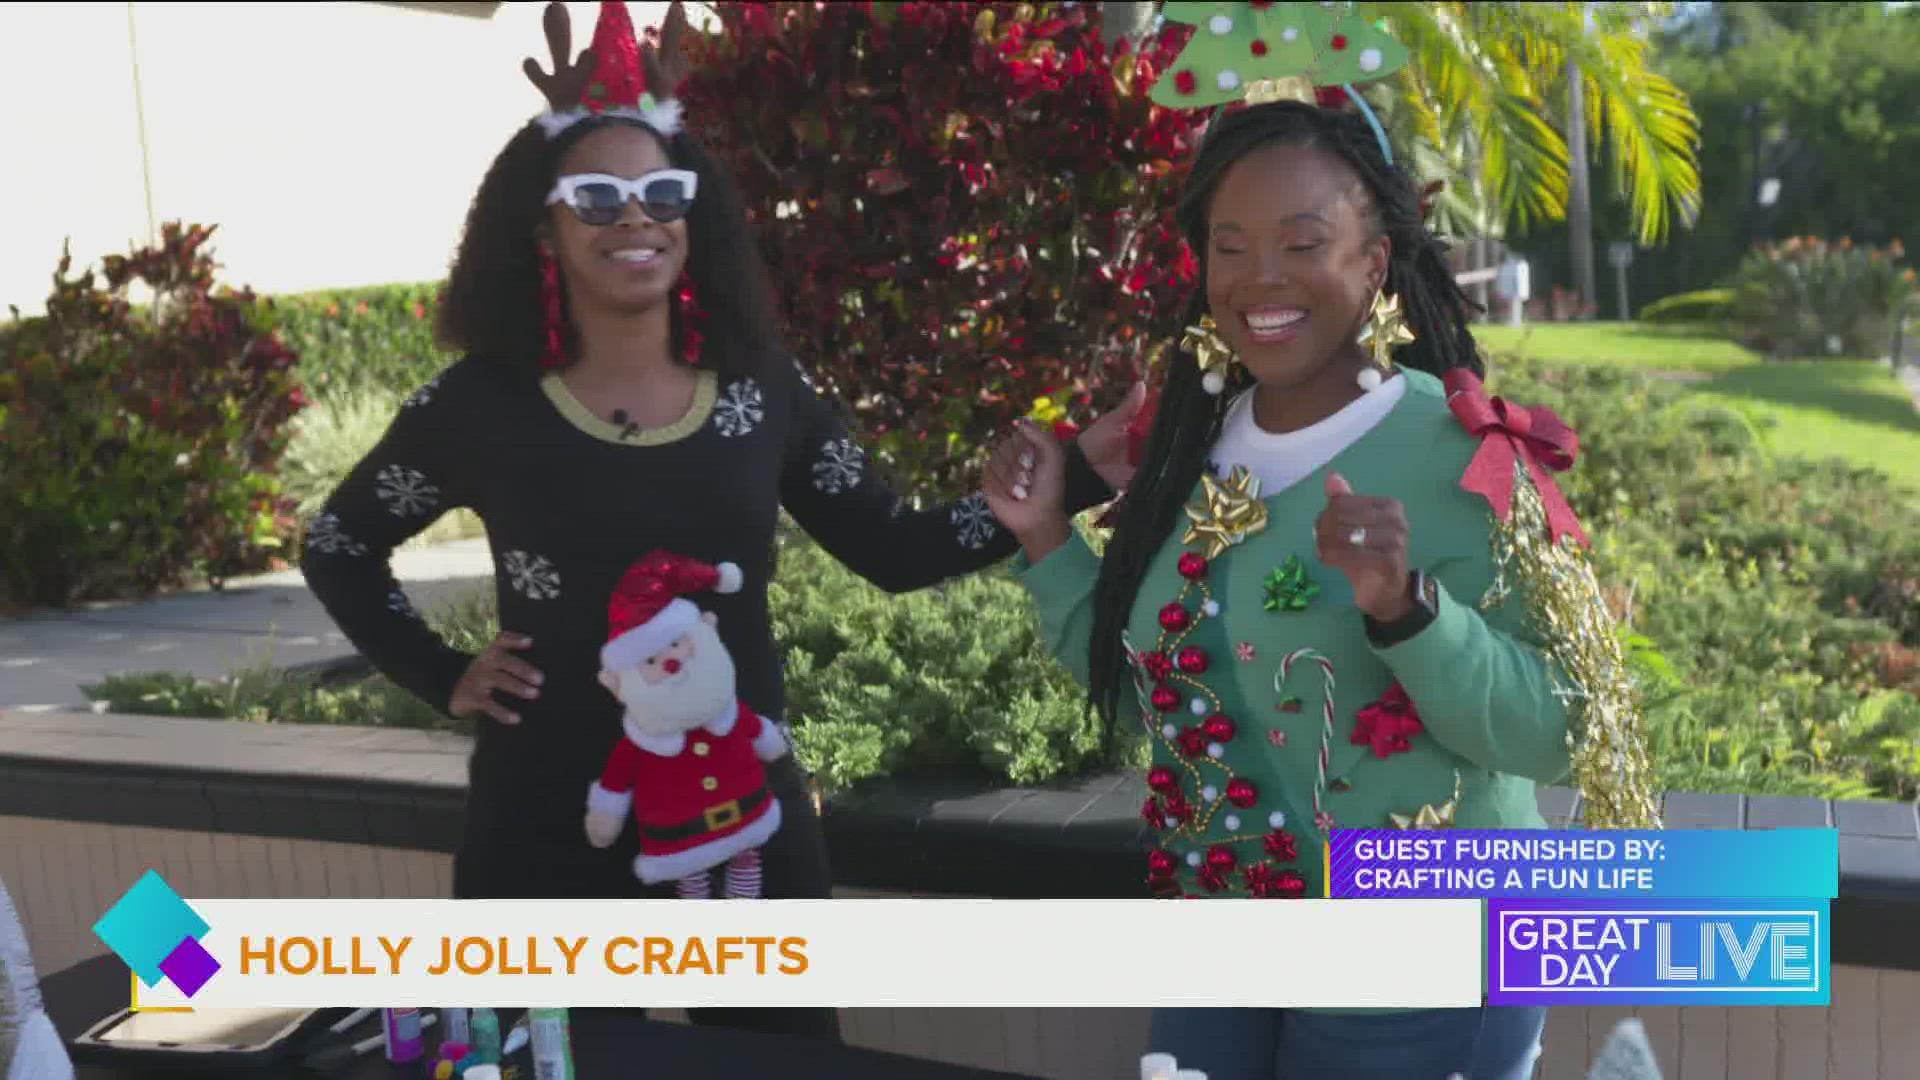 Karimah Henry from "Crafting a Fun Life shares holiday crafts.